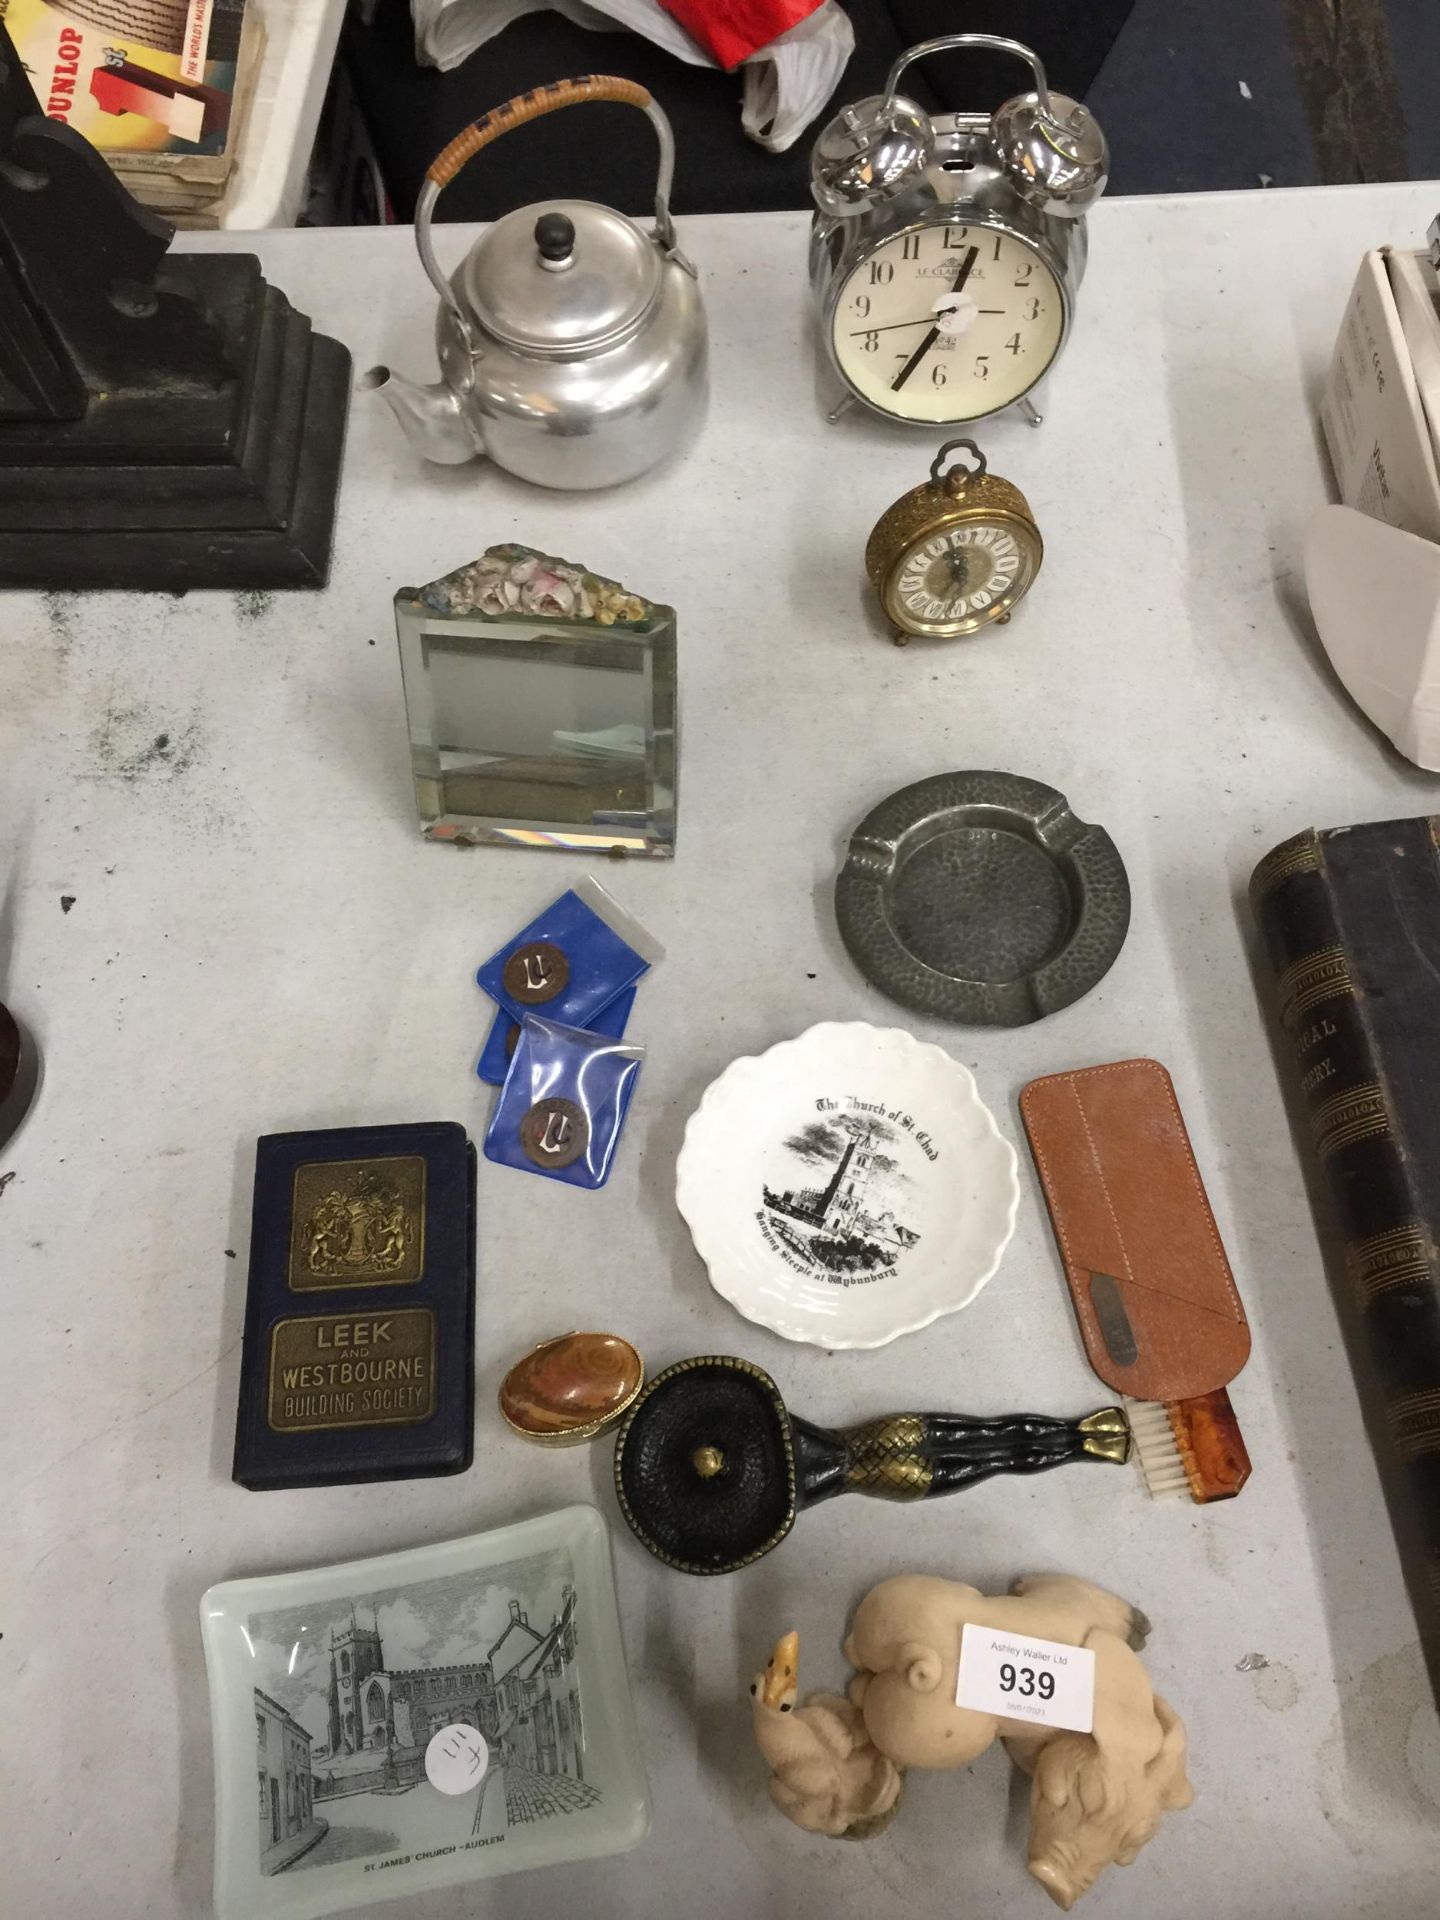 A MIXED LOT TO INCLUDE A SMALL BARBOLA MIRROR, TWO MANTLE CLOCKS, A VINTAGE BANK MONEY SAFE, PIGGIN'